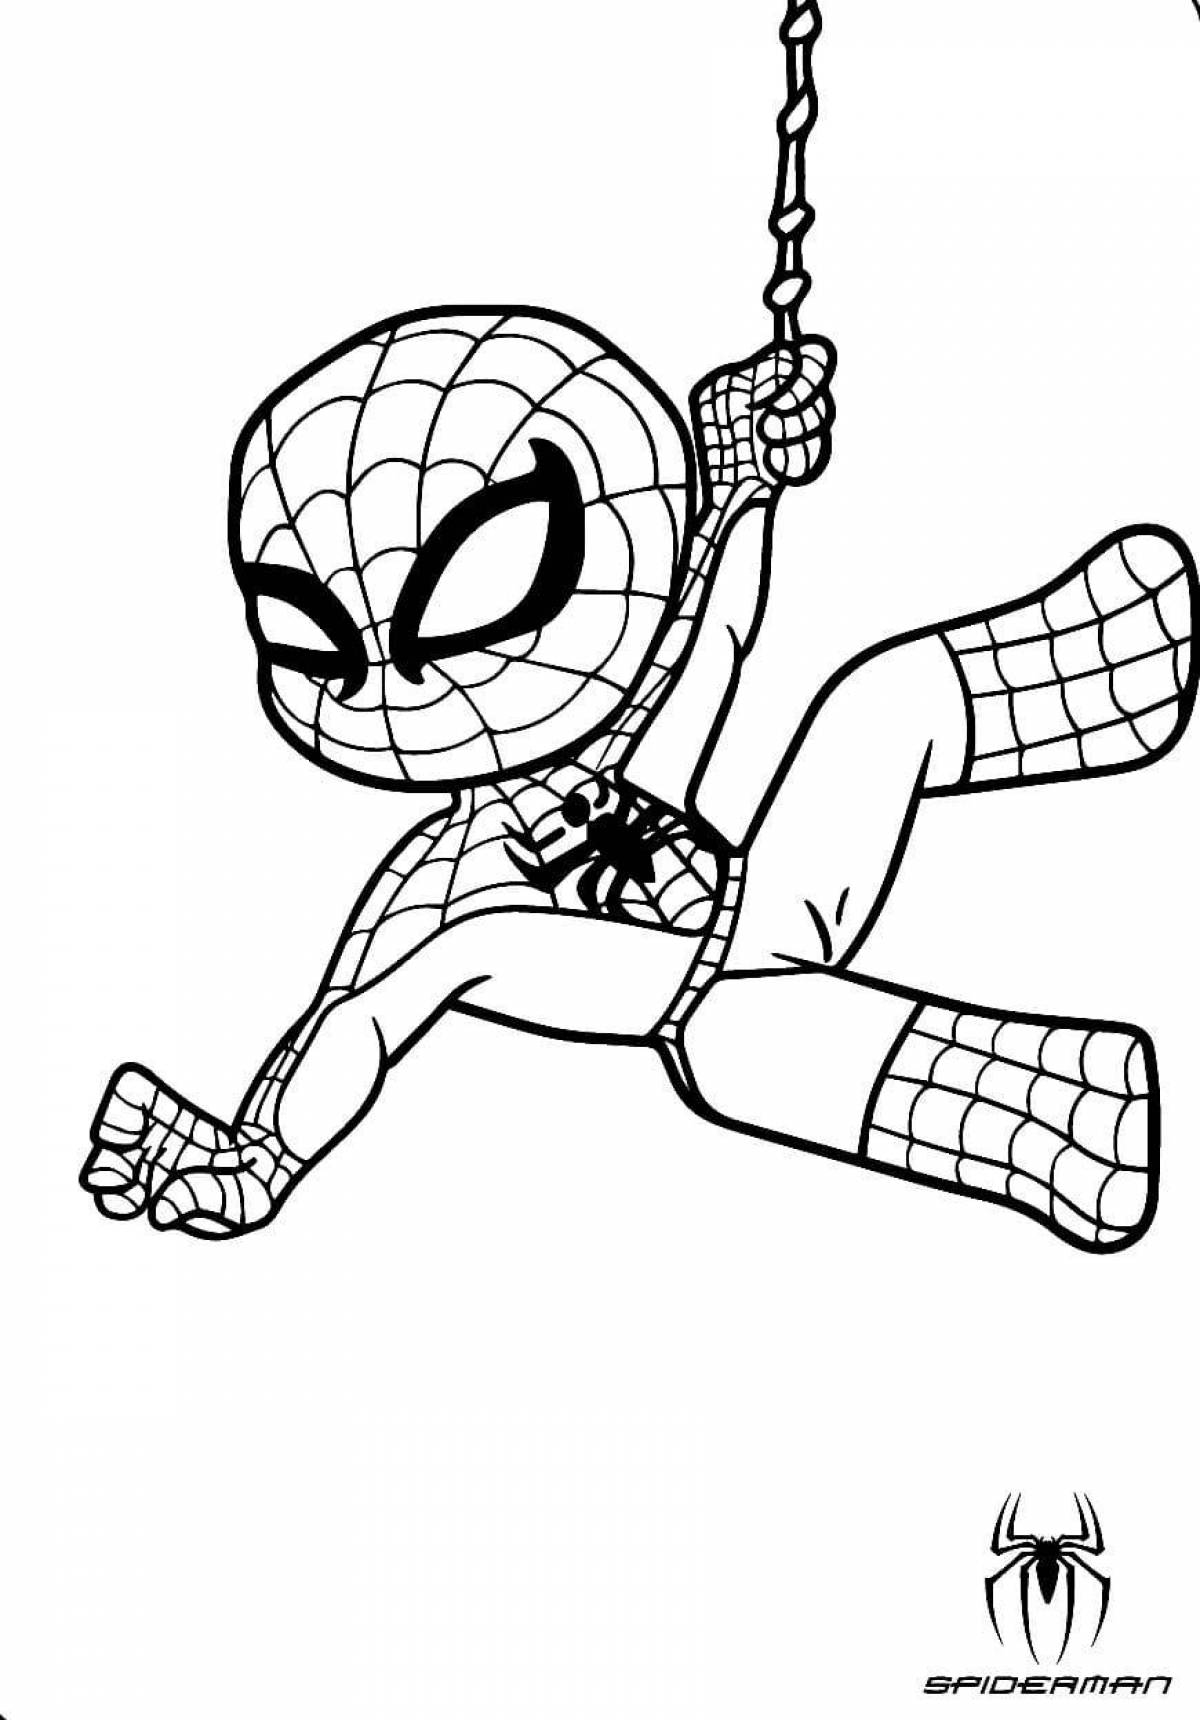 Funny Spiderman coloring pages for kids